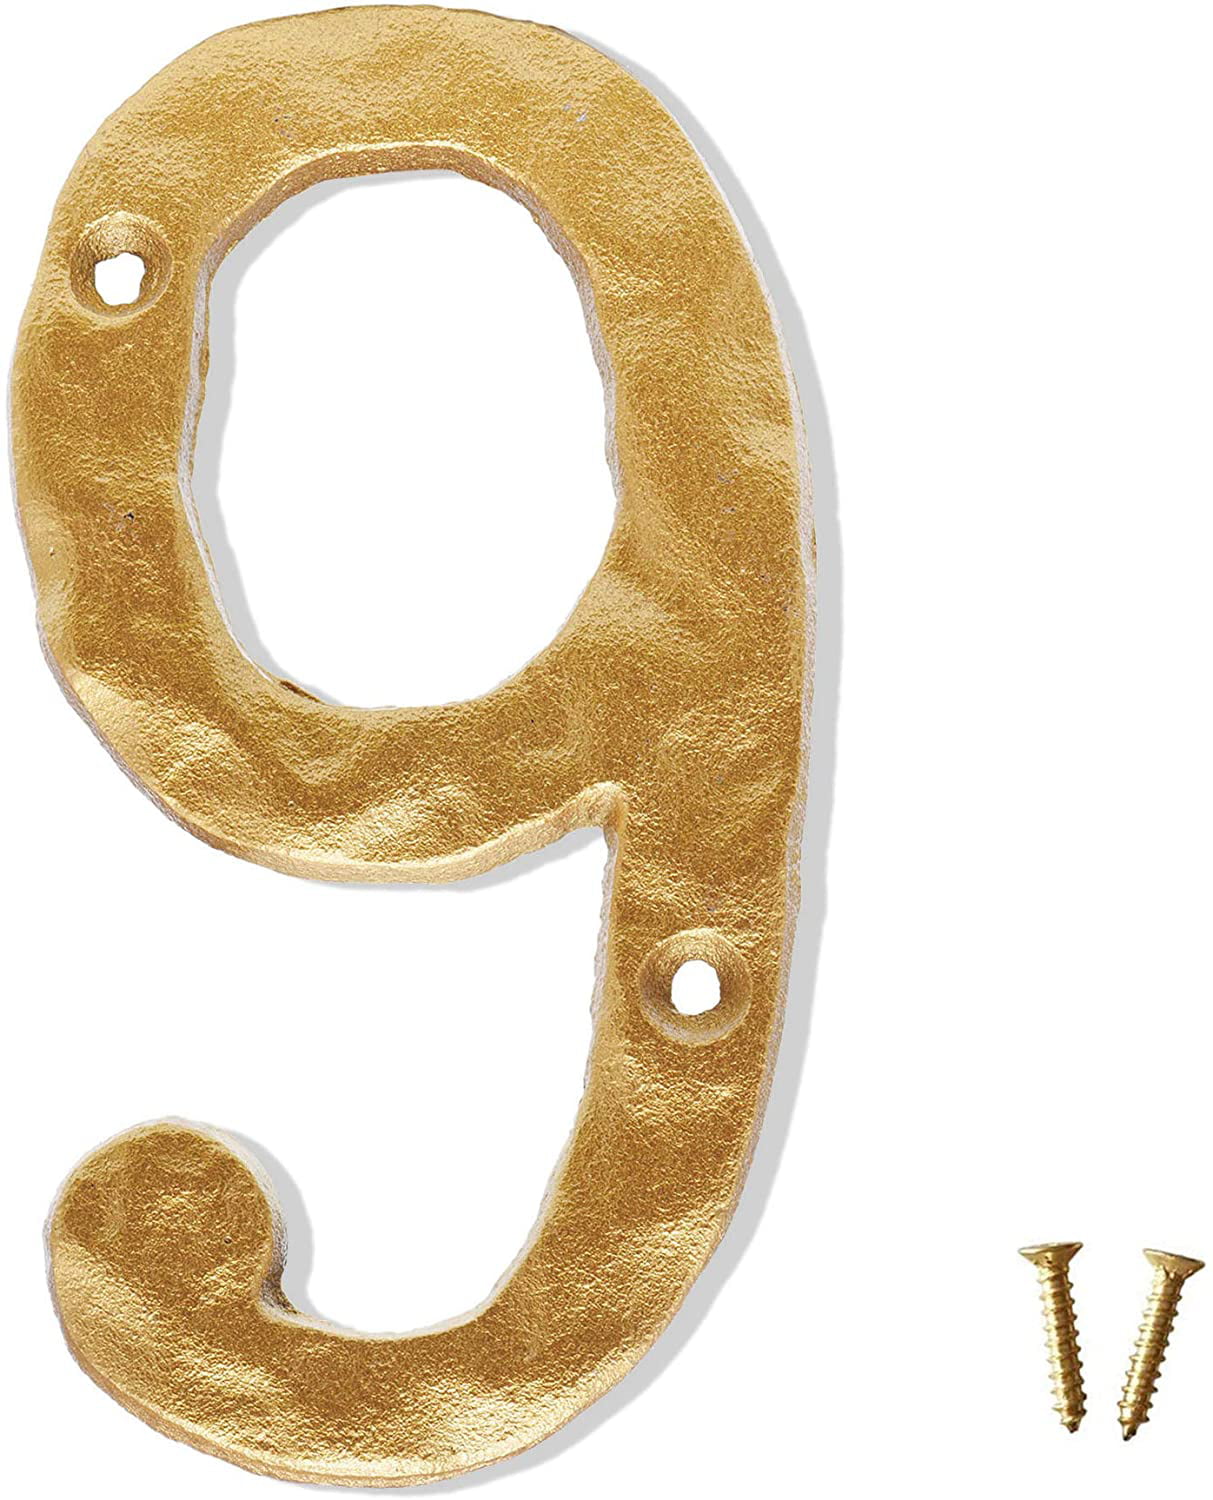 Golden 6 Inch House Numbers Number 9 Heavy Duty Rustic Cast Iron Metal Home Address Number with Unique Hammered Appearance